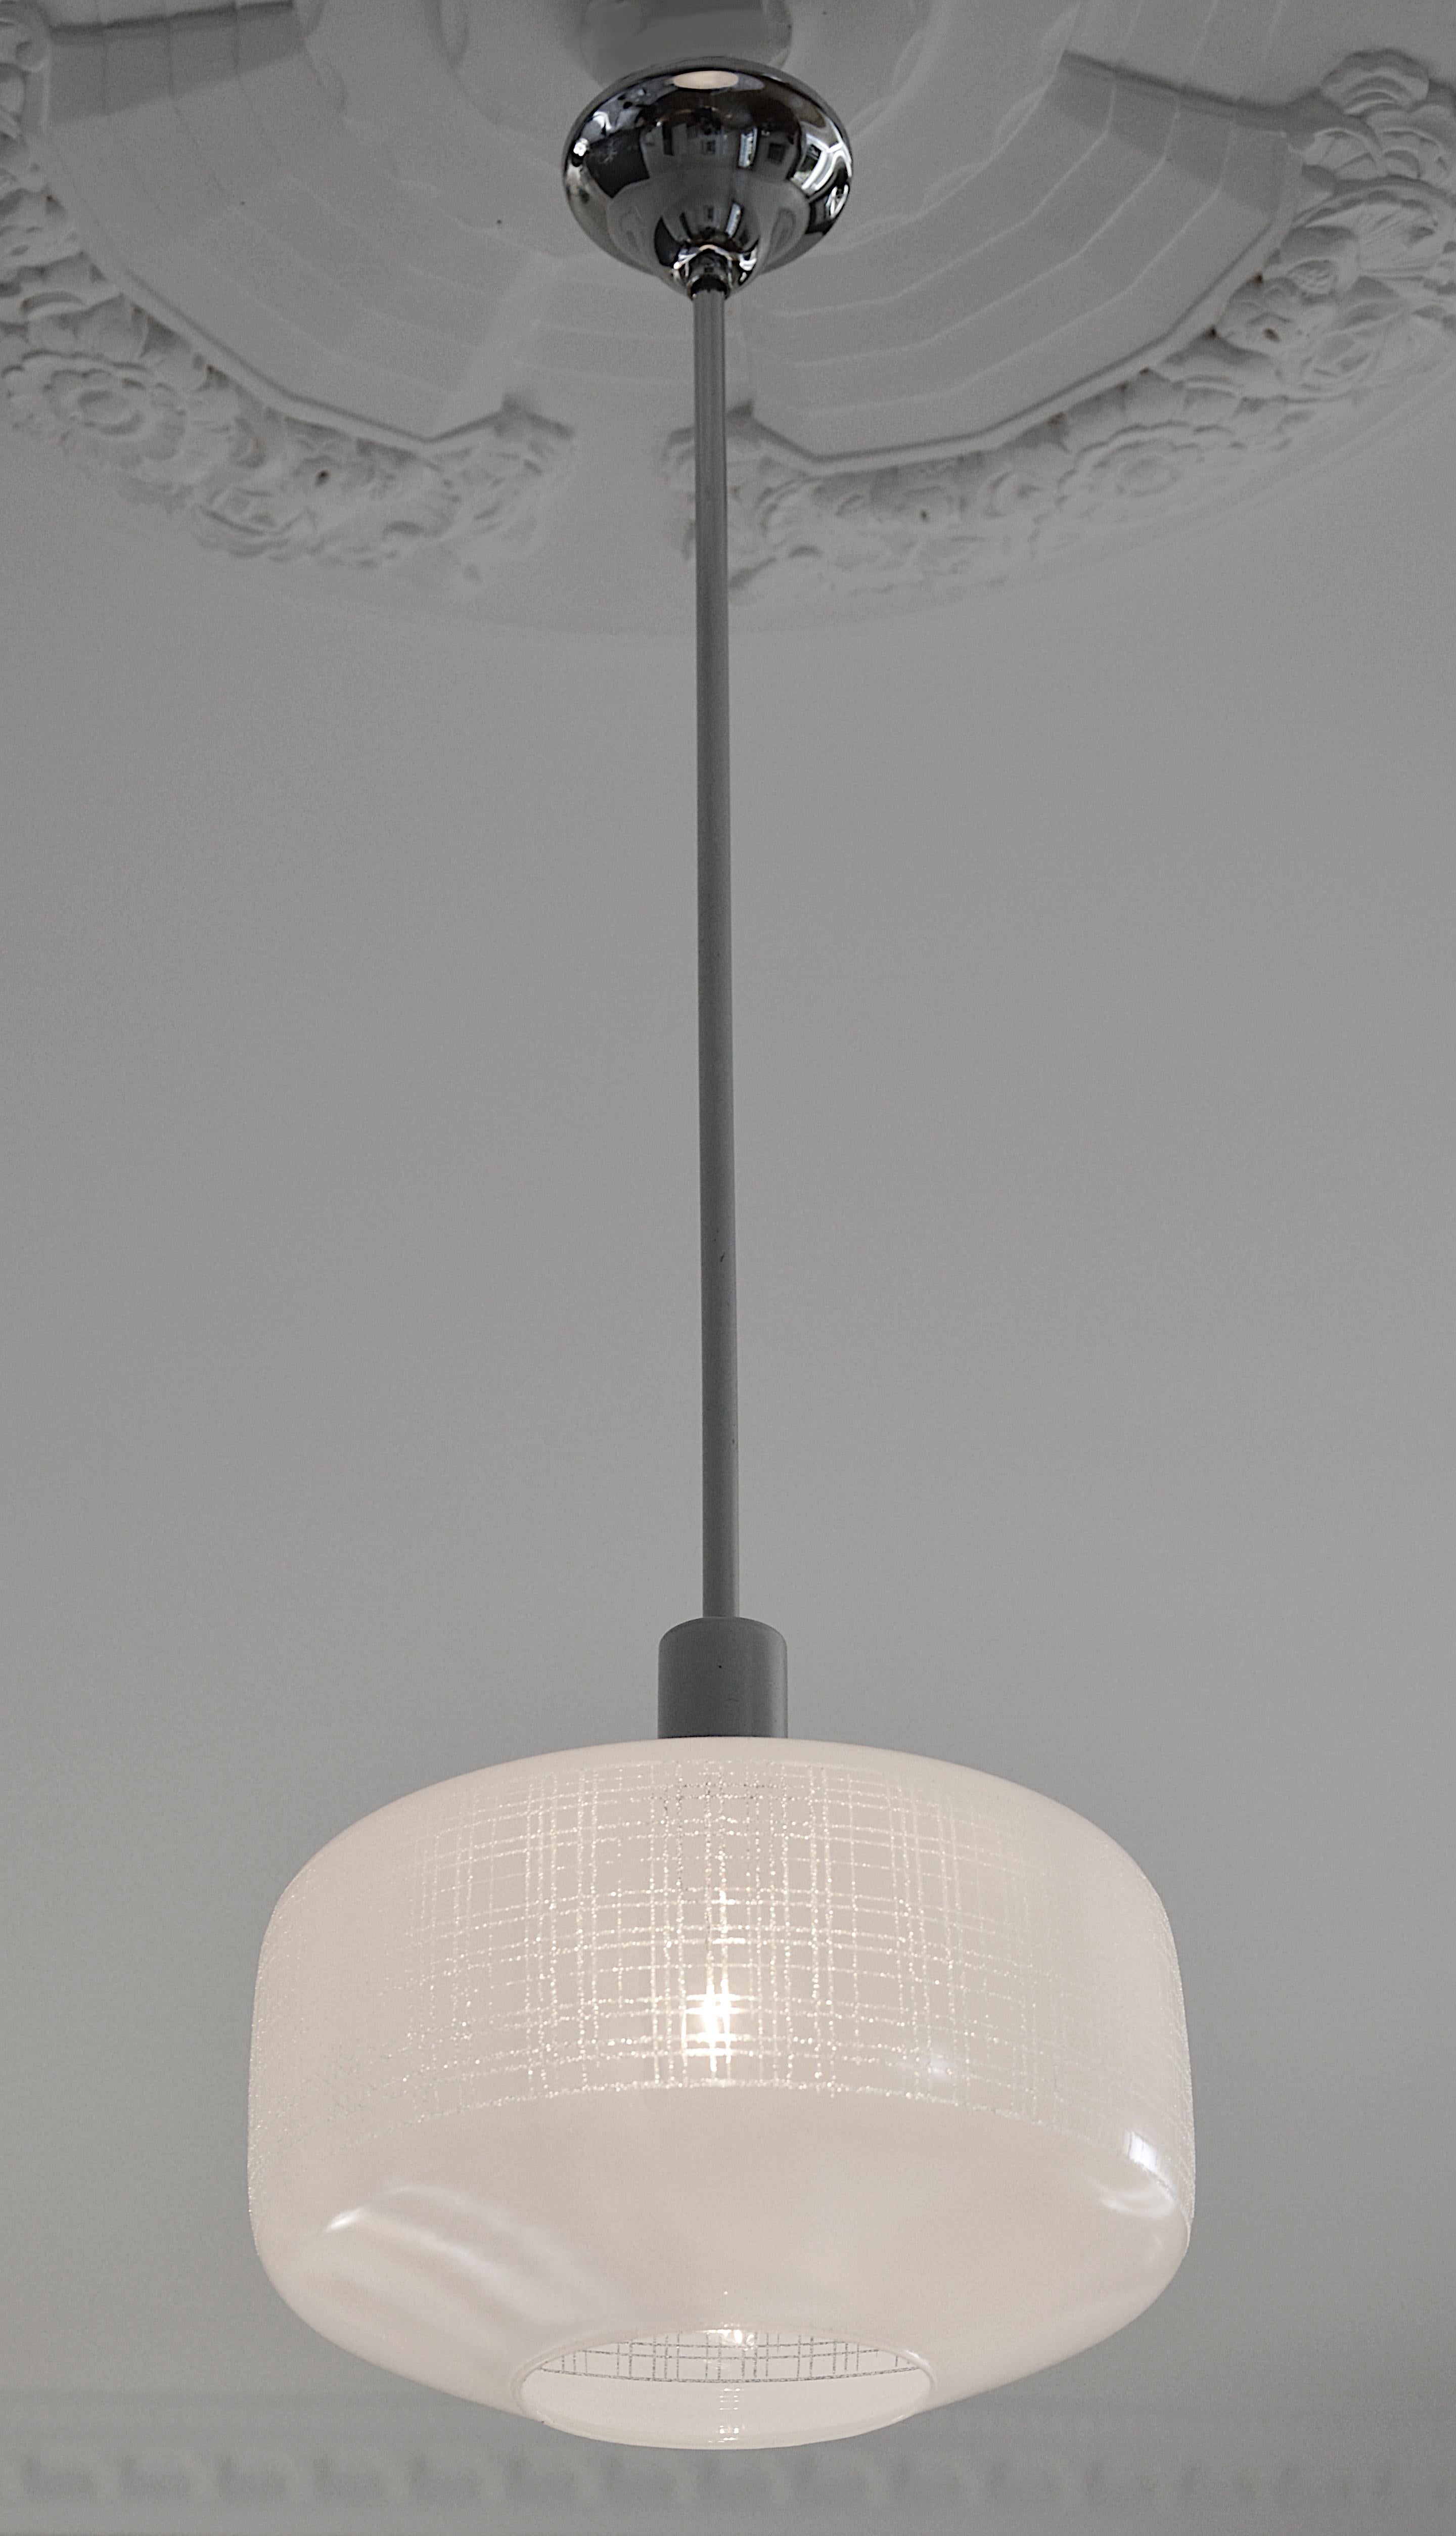 French midcentury ceiling-light pendant by Arlus (Paris), France, 1950s. 1st class refined French style. Typical cylindrical shade hung at its chromed metal fixture. Height 27.5